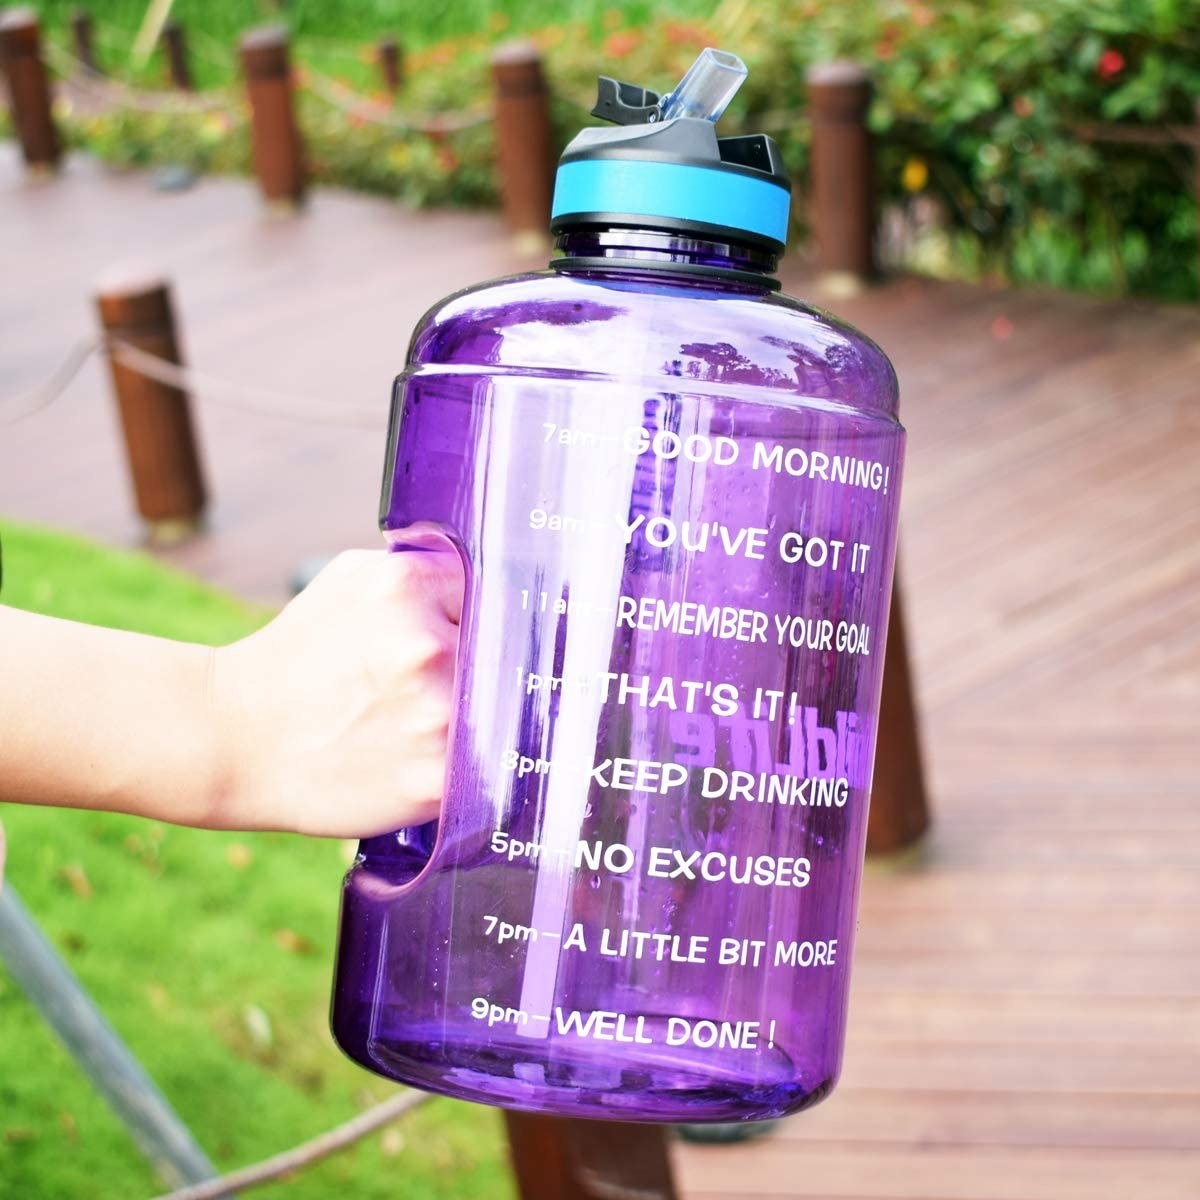 A person holding the water bottle by its handle